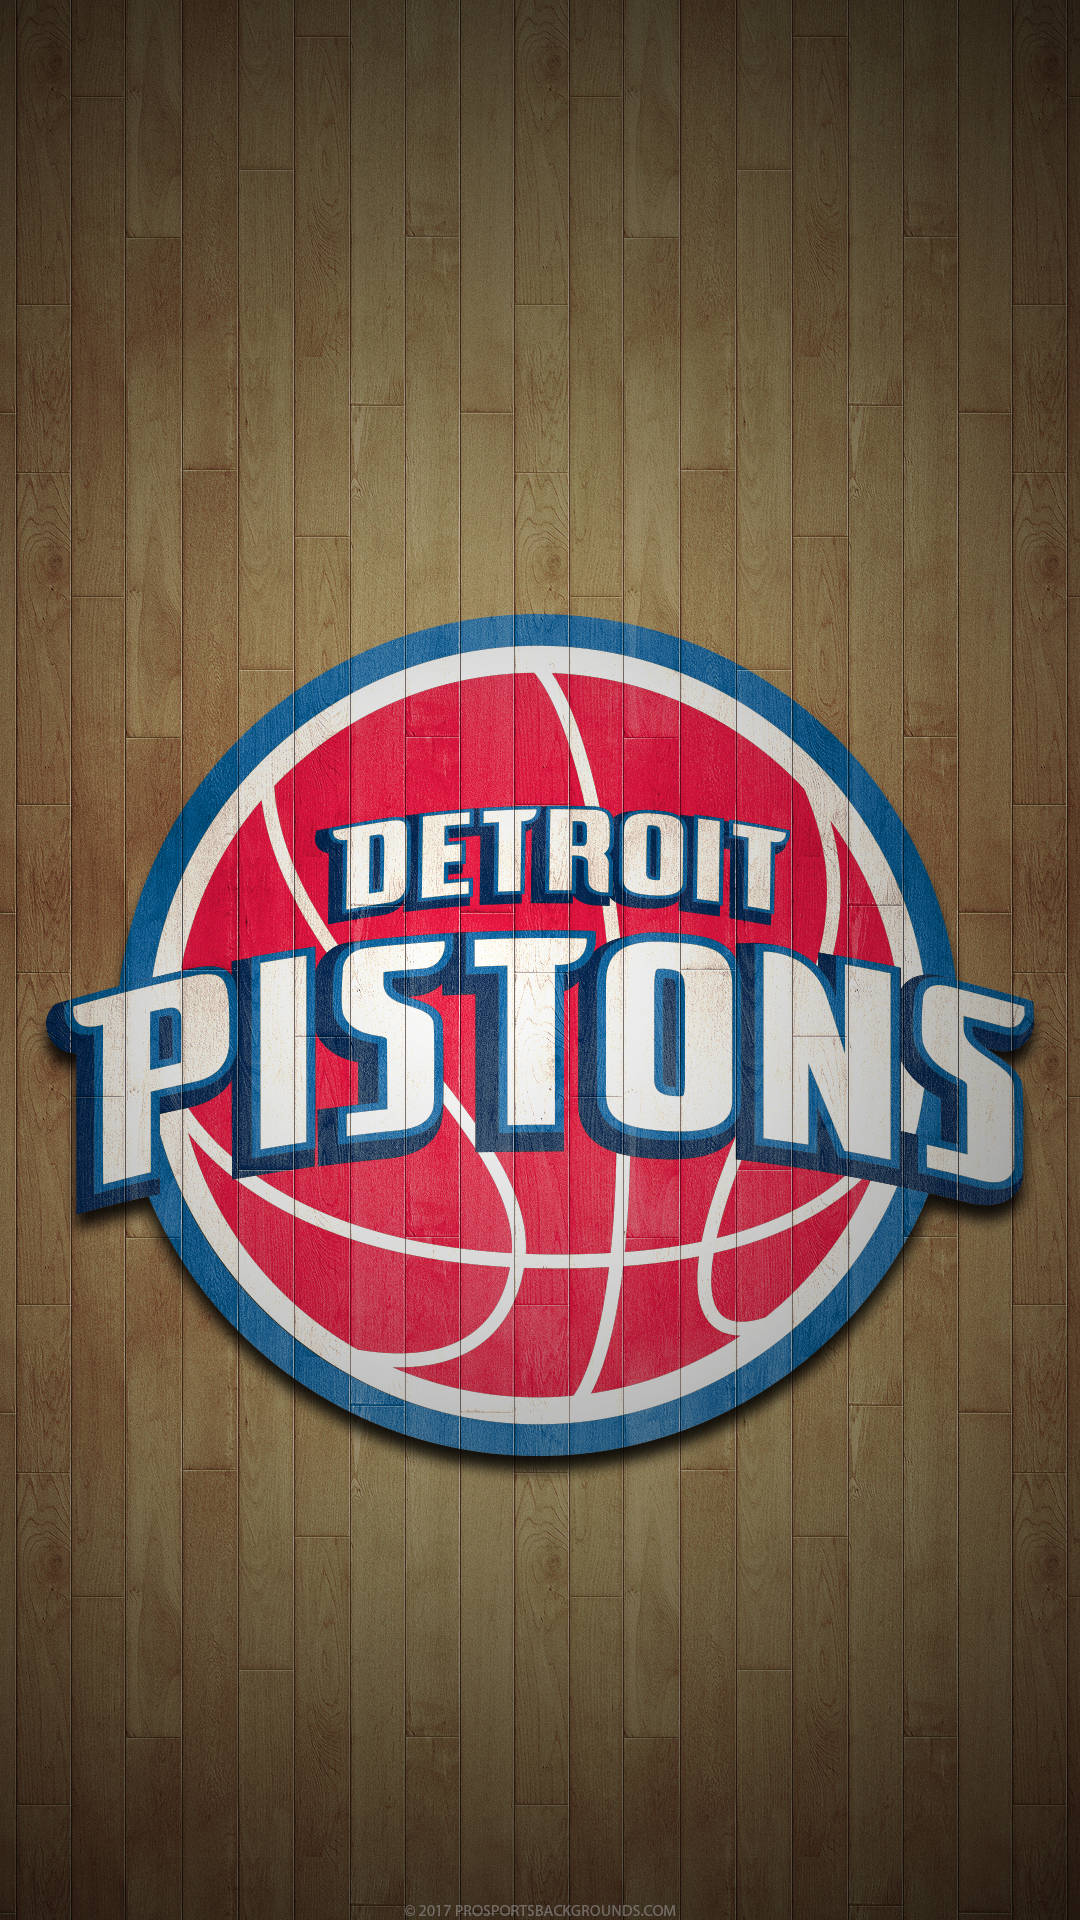 Detroit Pistons Logo proudly displayed on the Court Wallpaper